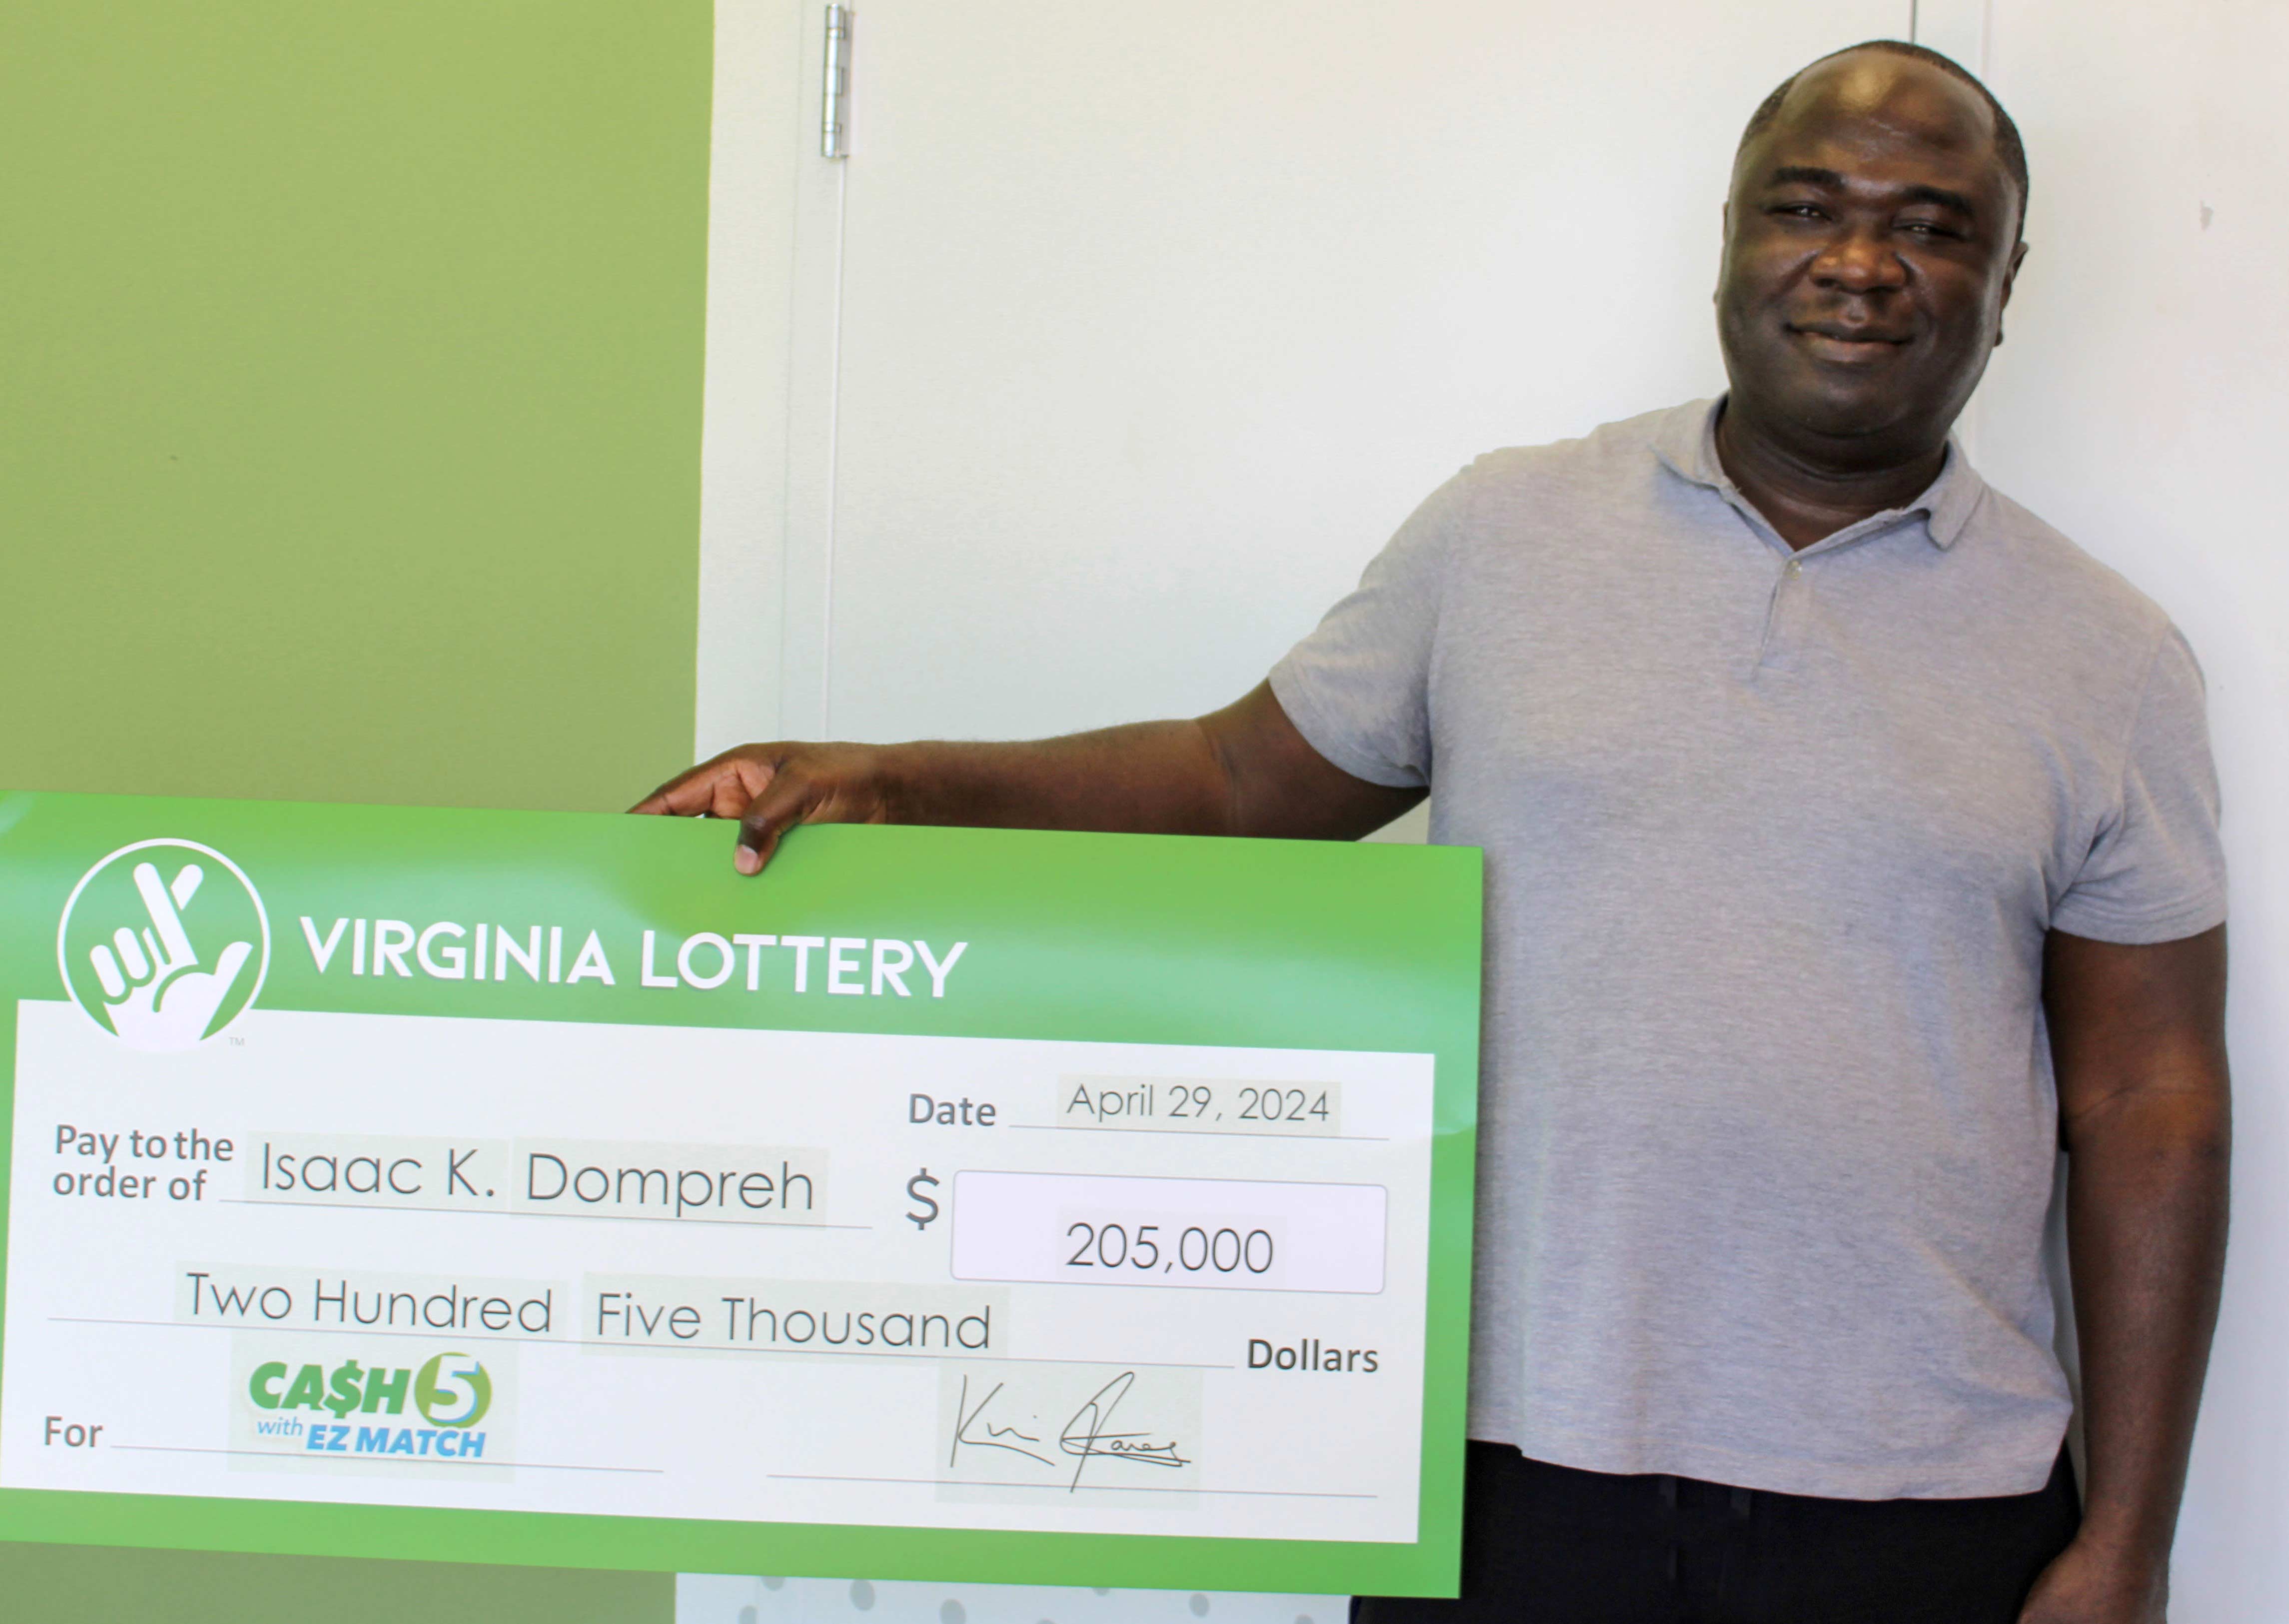 Number magic: Statistician uses birthday numbers to win $205,000 Cash 5 jackpot